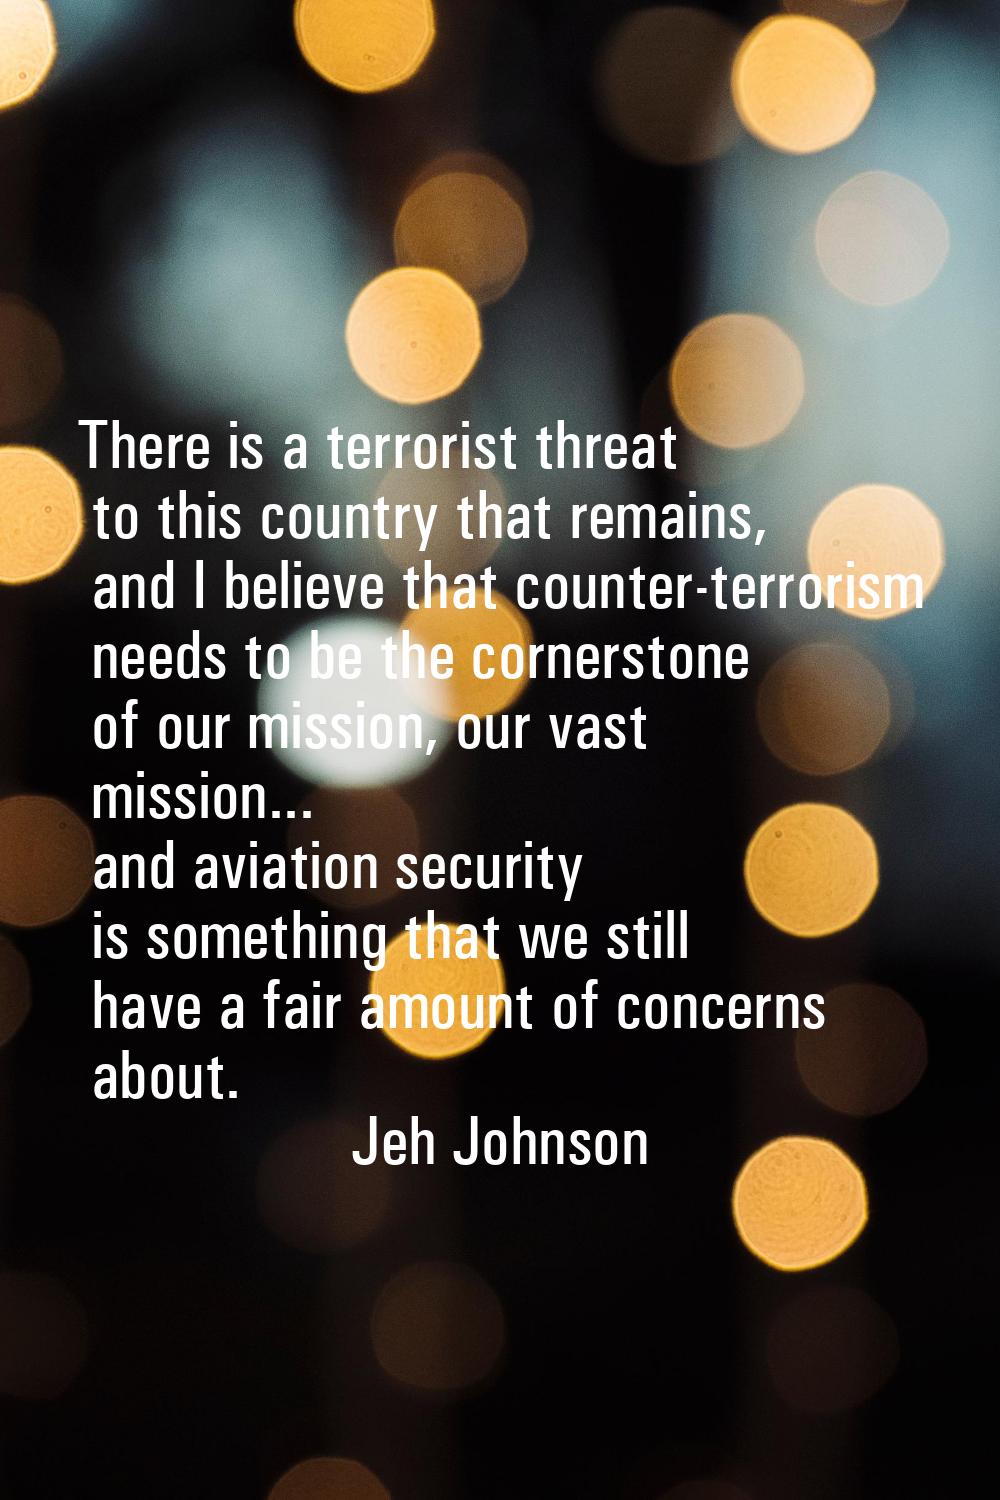 There is a terrorist threat to this country that remains, and I believe that counter-terrorism need